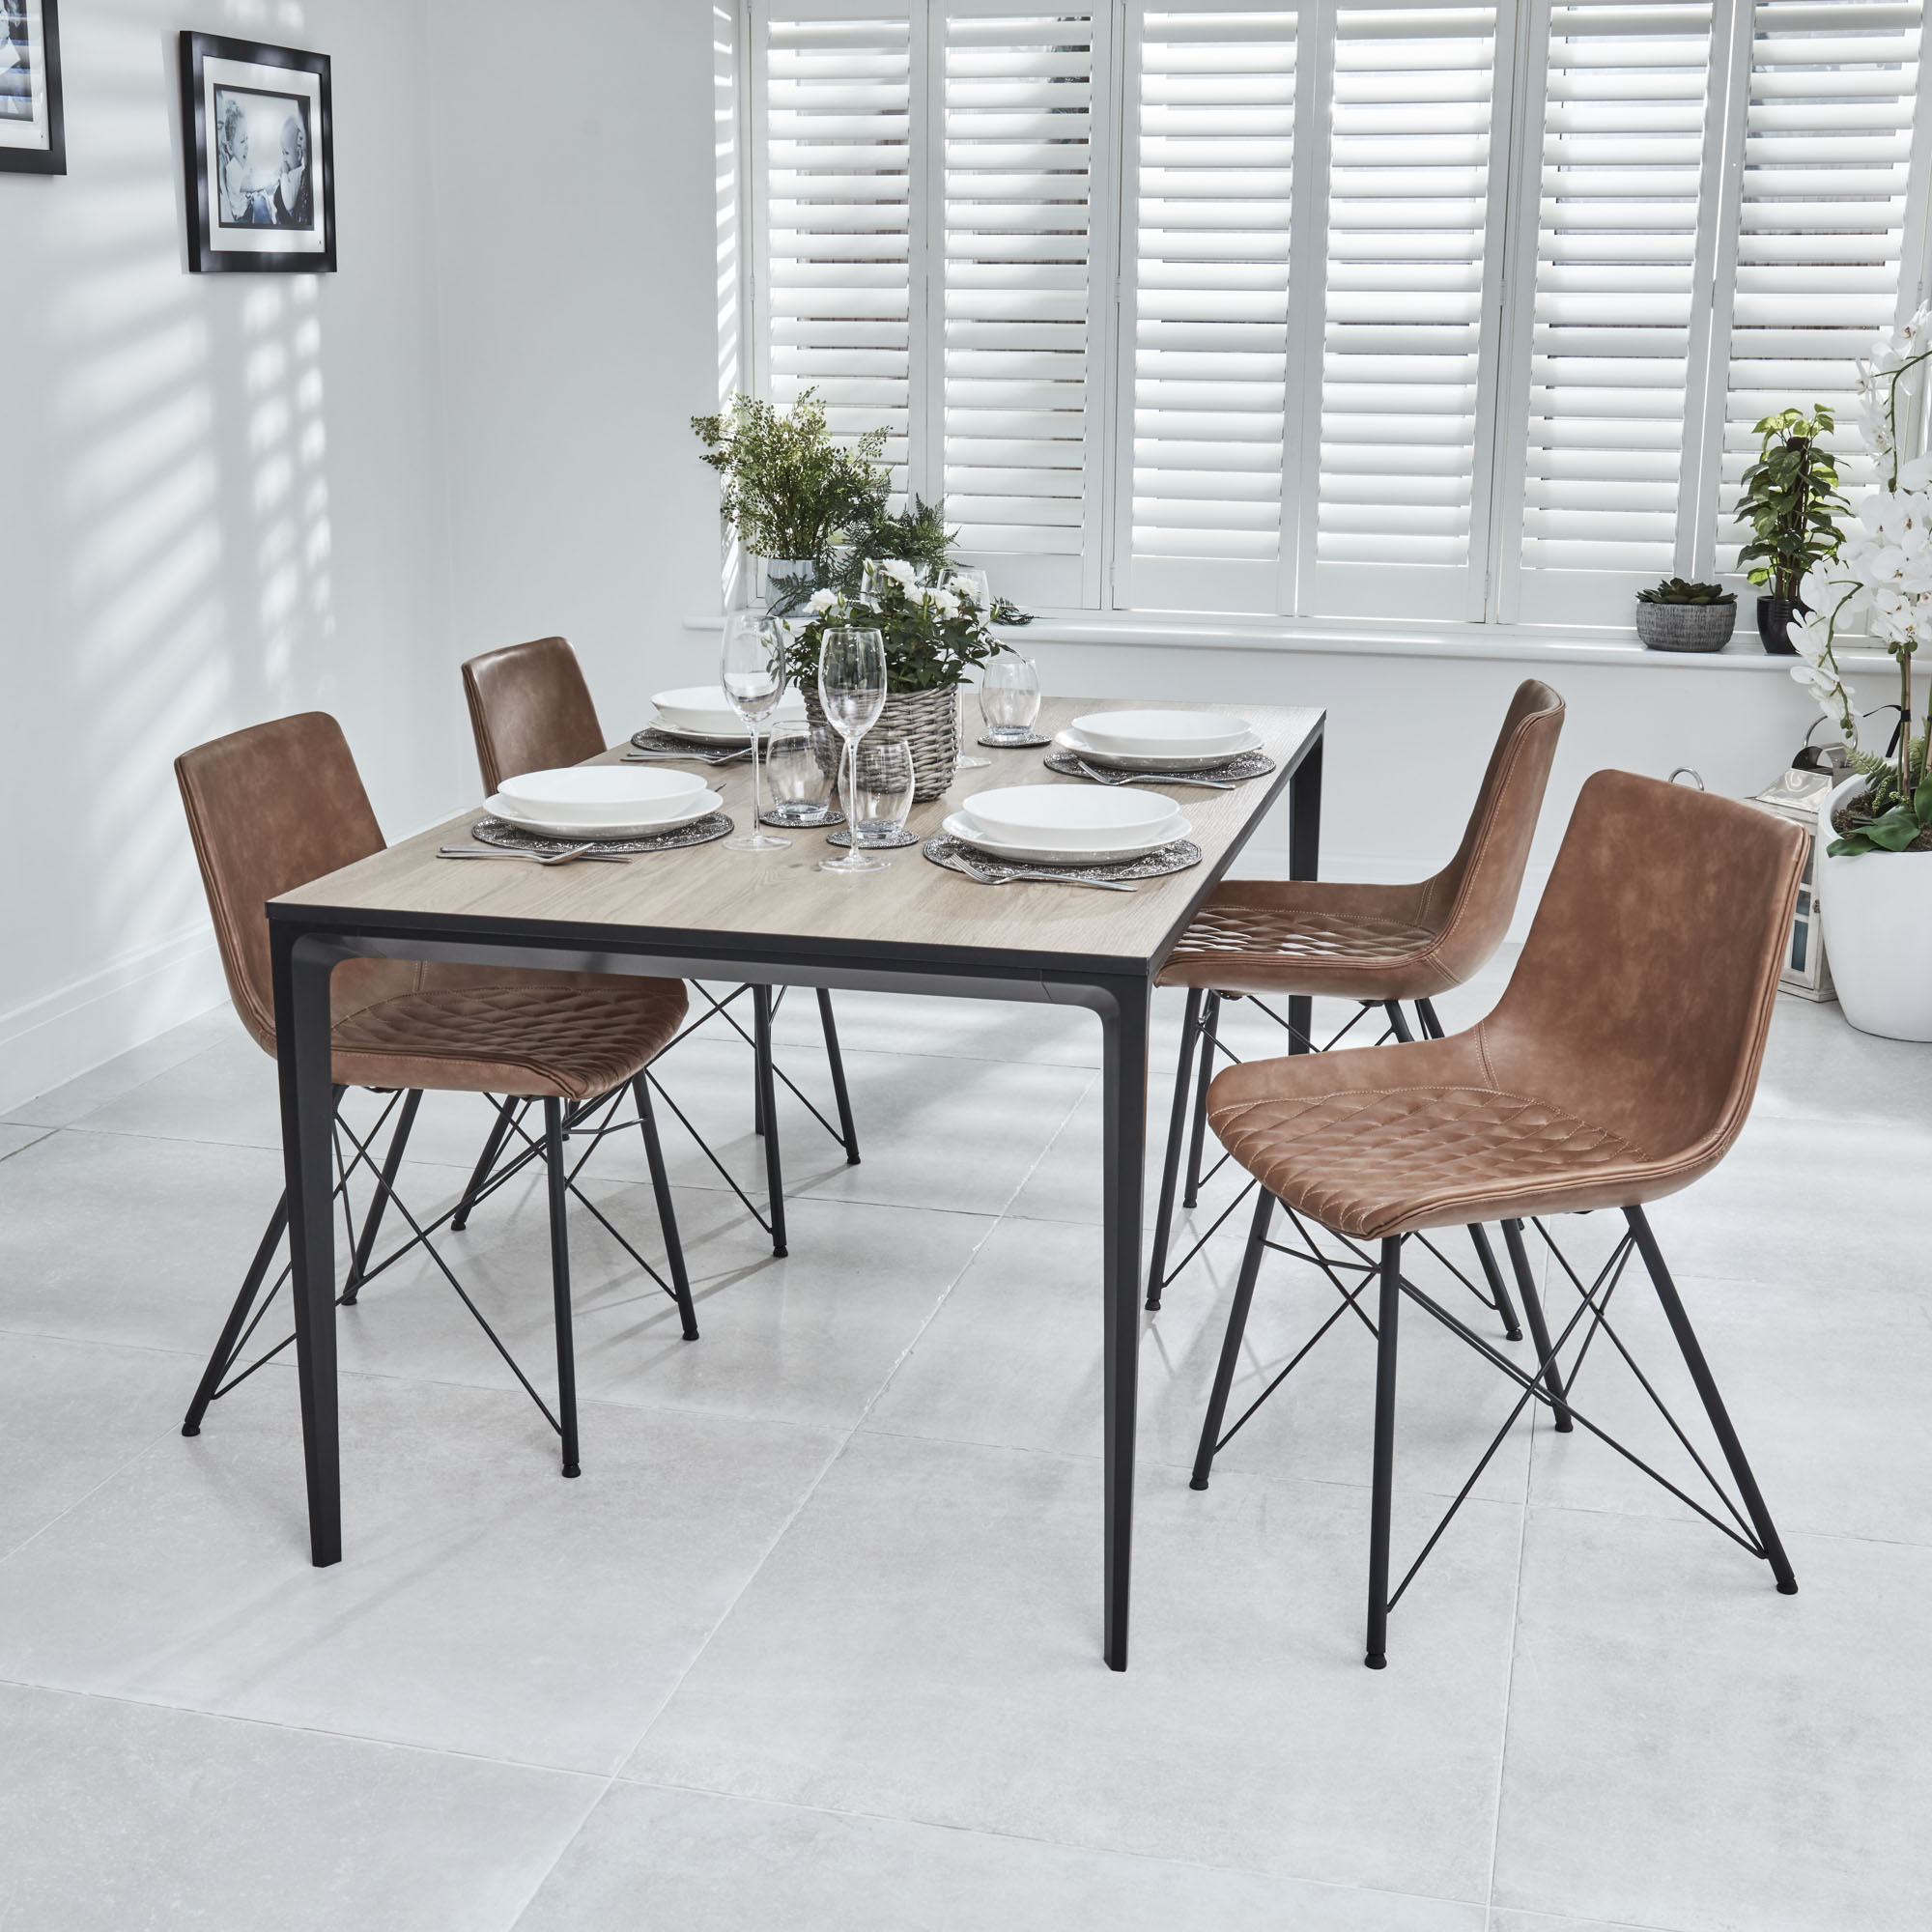 Bellagio 1.6M Natural Oak Melamine Dining Table Set with 4x Leon Tan Dining Chairs